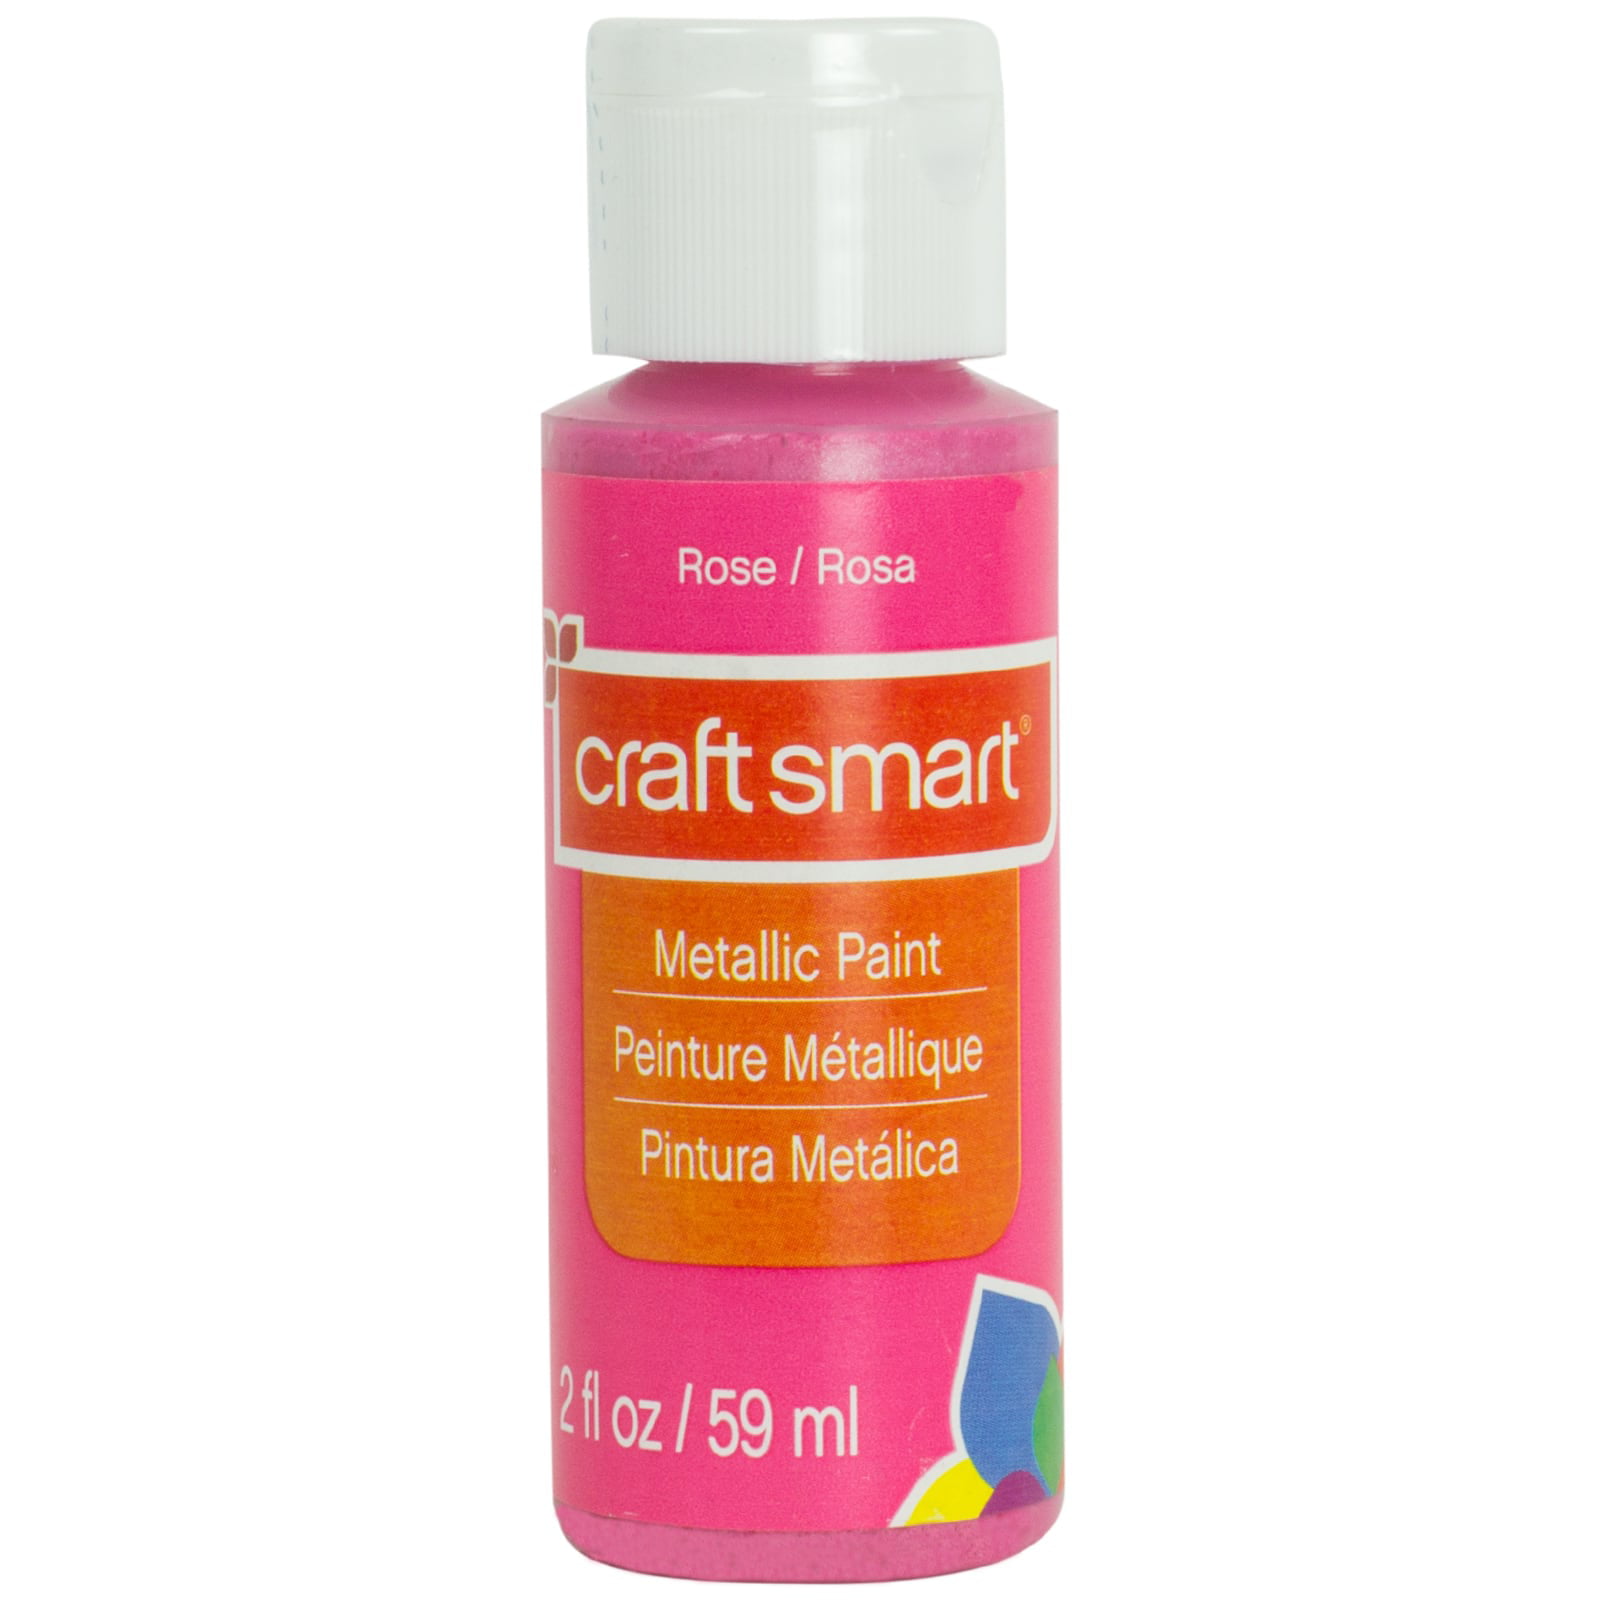 12 Pack: Metallic Outdoor Acrylic Paint by Craft Smart®, 2oz.